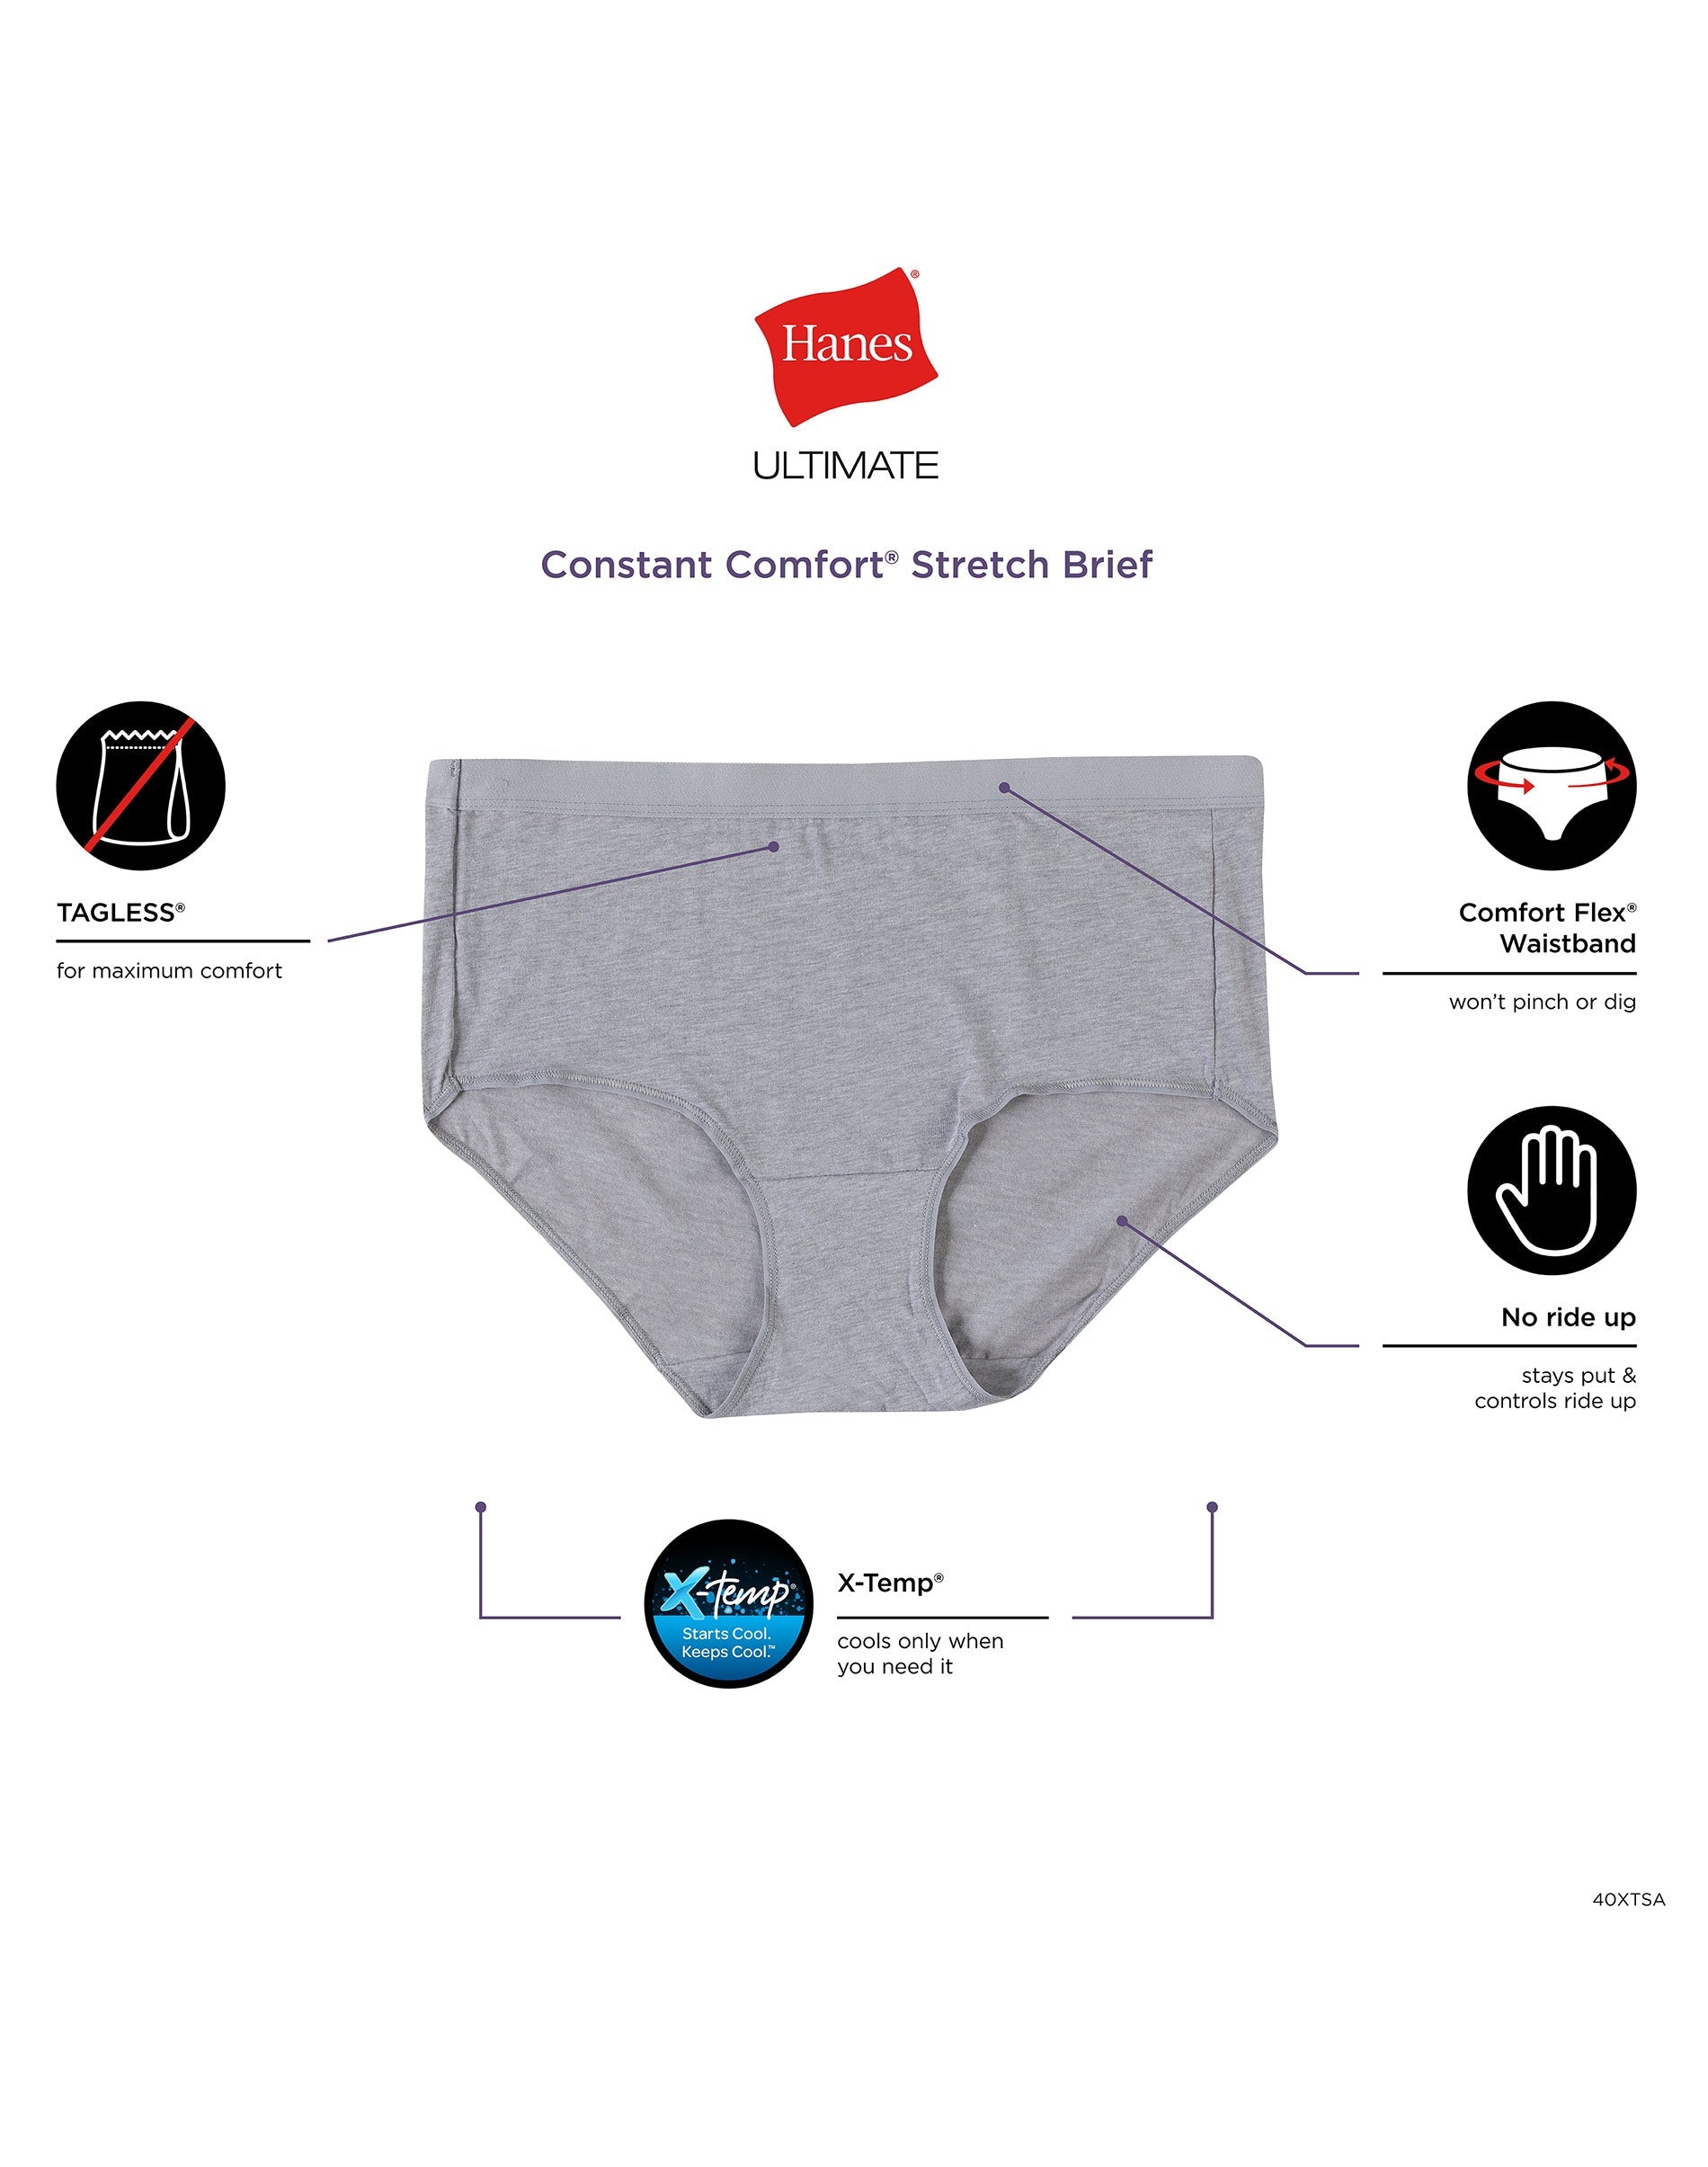 Hanes Ultimate Women's Constant Comfort Stretch with X-Temp Brief, 3-pack 